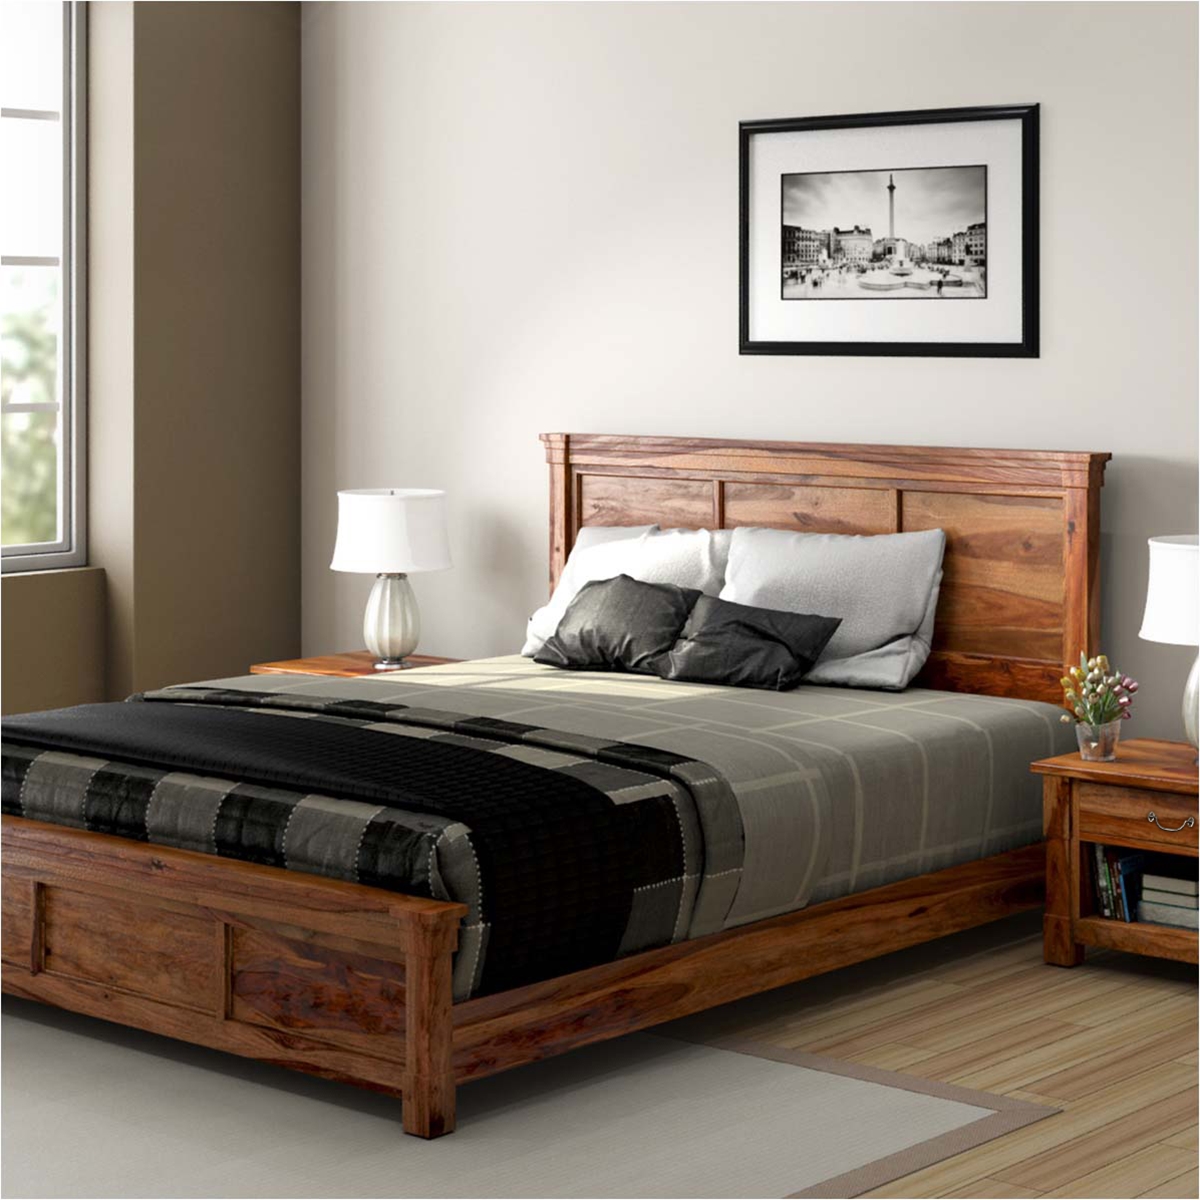 Solid wood beds modern farmhouse rustic solid wood platform bed SSRSWRD